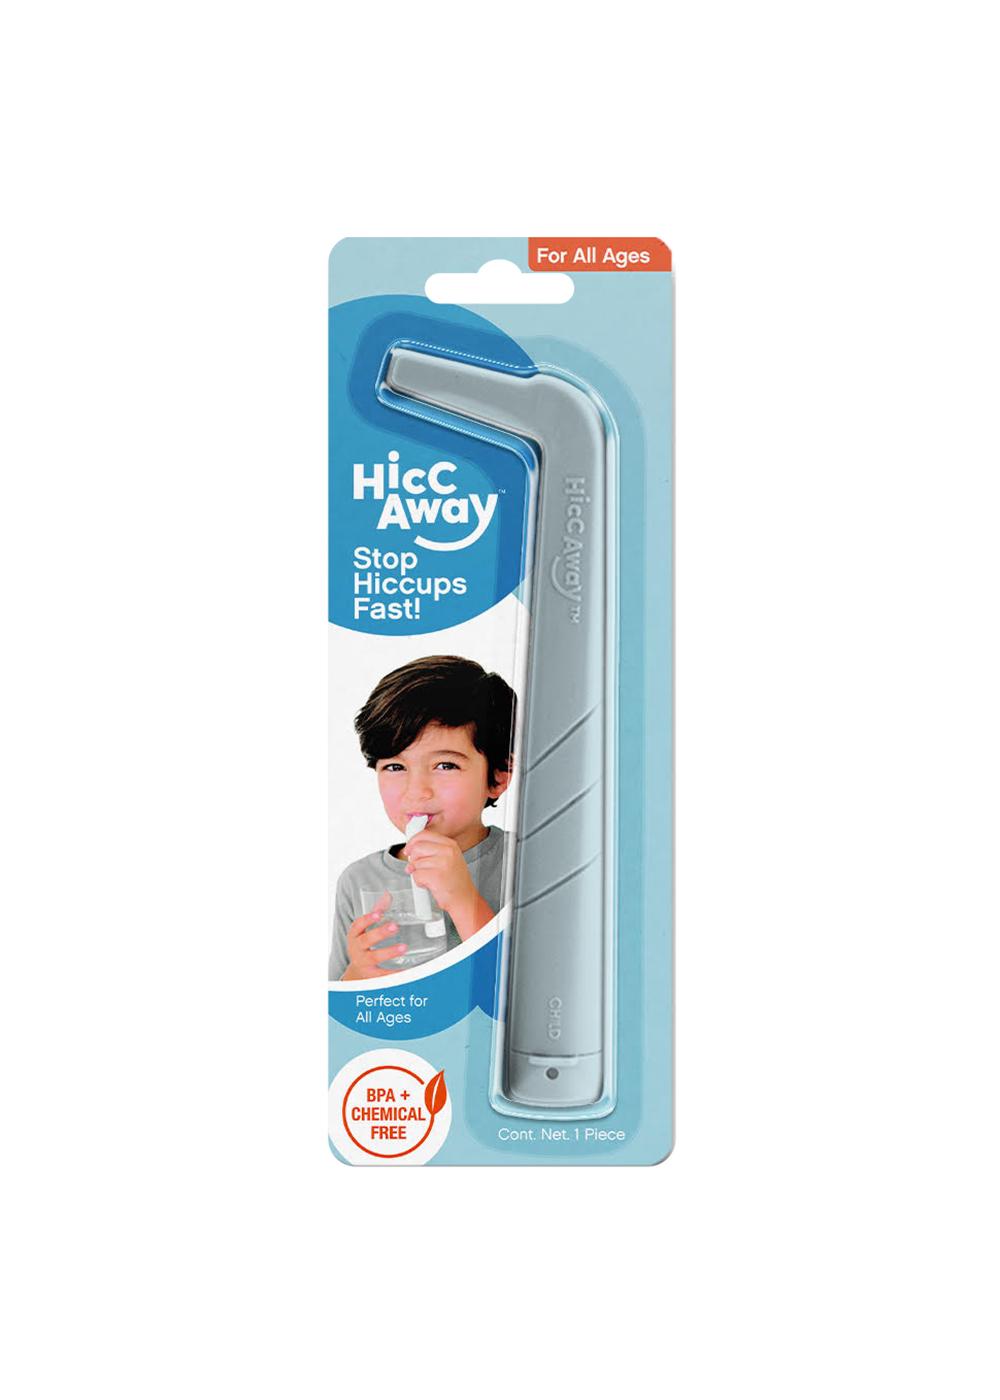 HICCAWAY Hiccup Straw Stops hiccups Fast! Clinically Proven Hiccup Relief  for All Ages (Light Blue, 2 Count (Pack of 1))